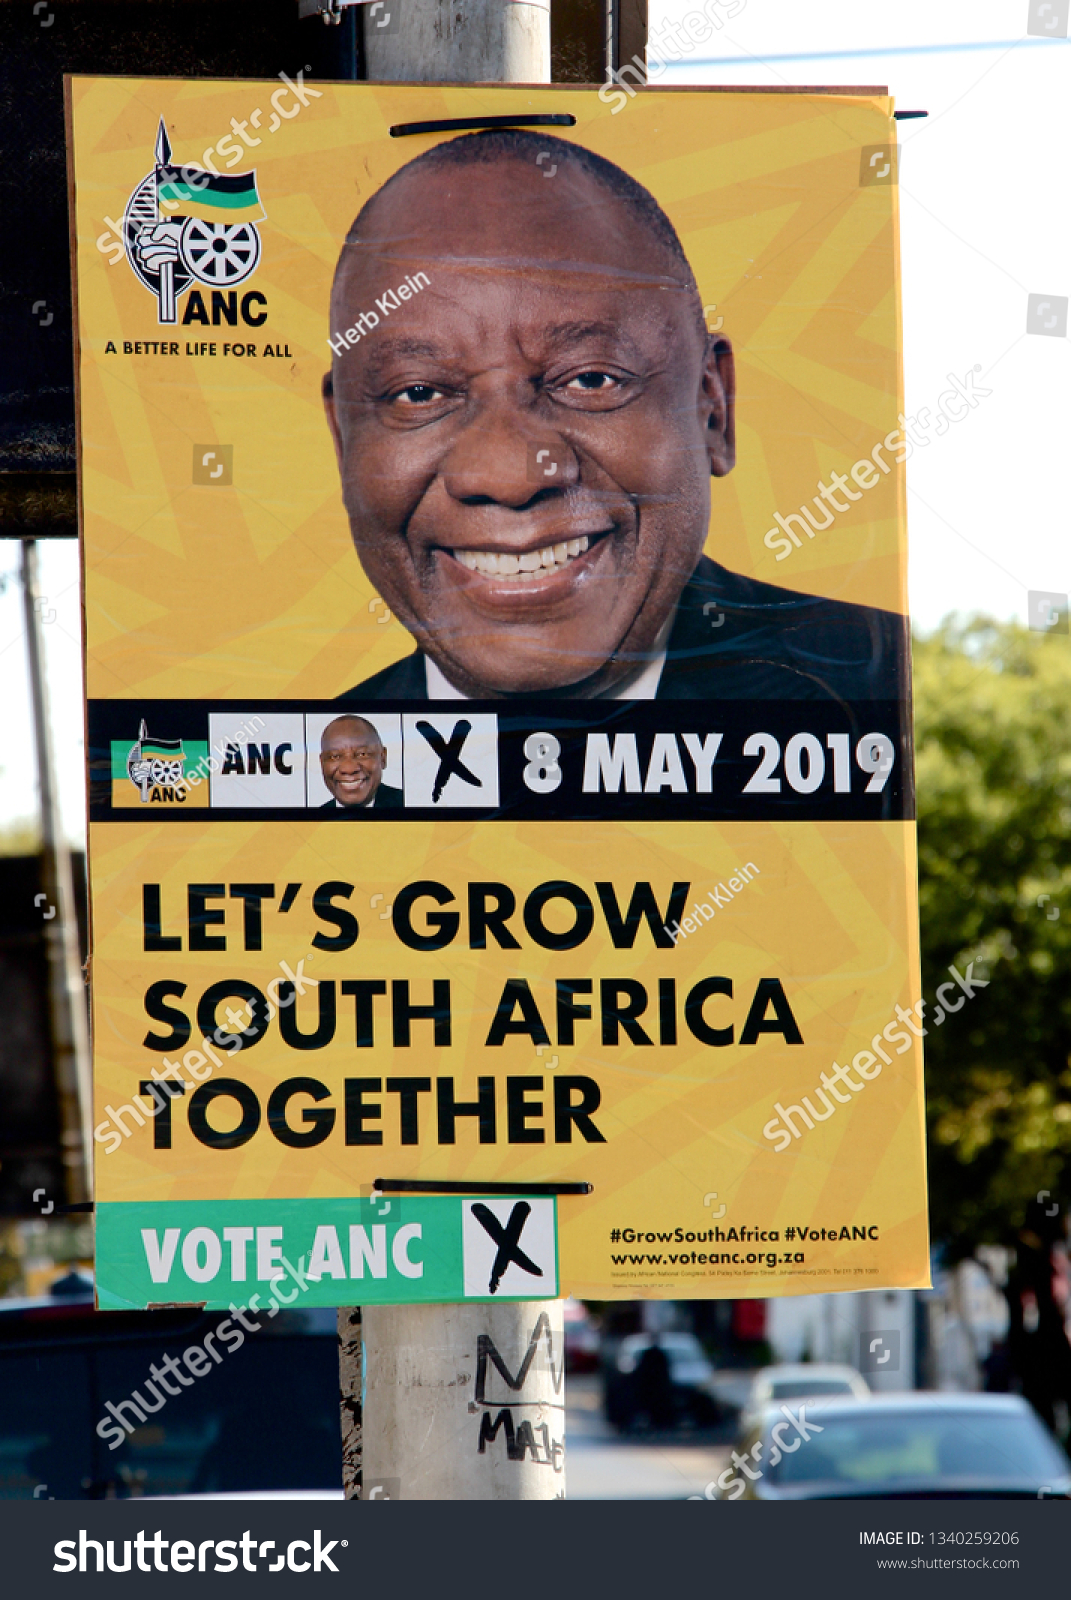 5 2019 south african general election Images, Stock Photos & Vectors